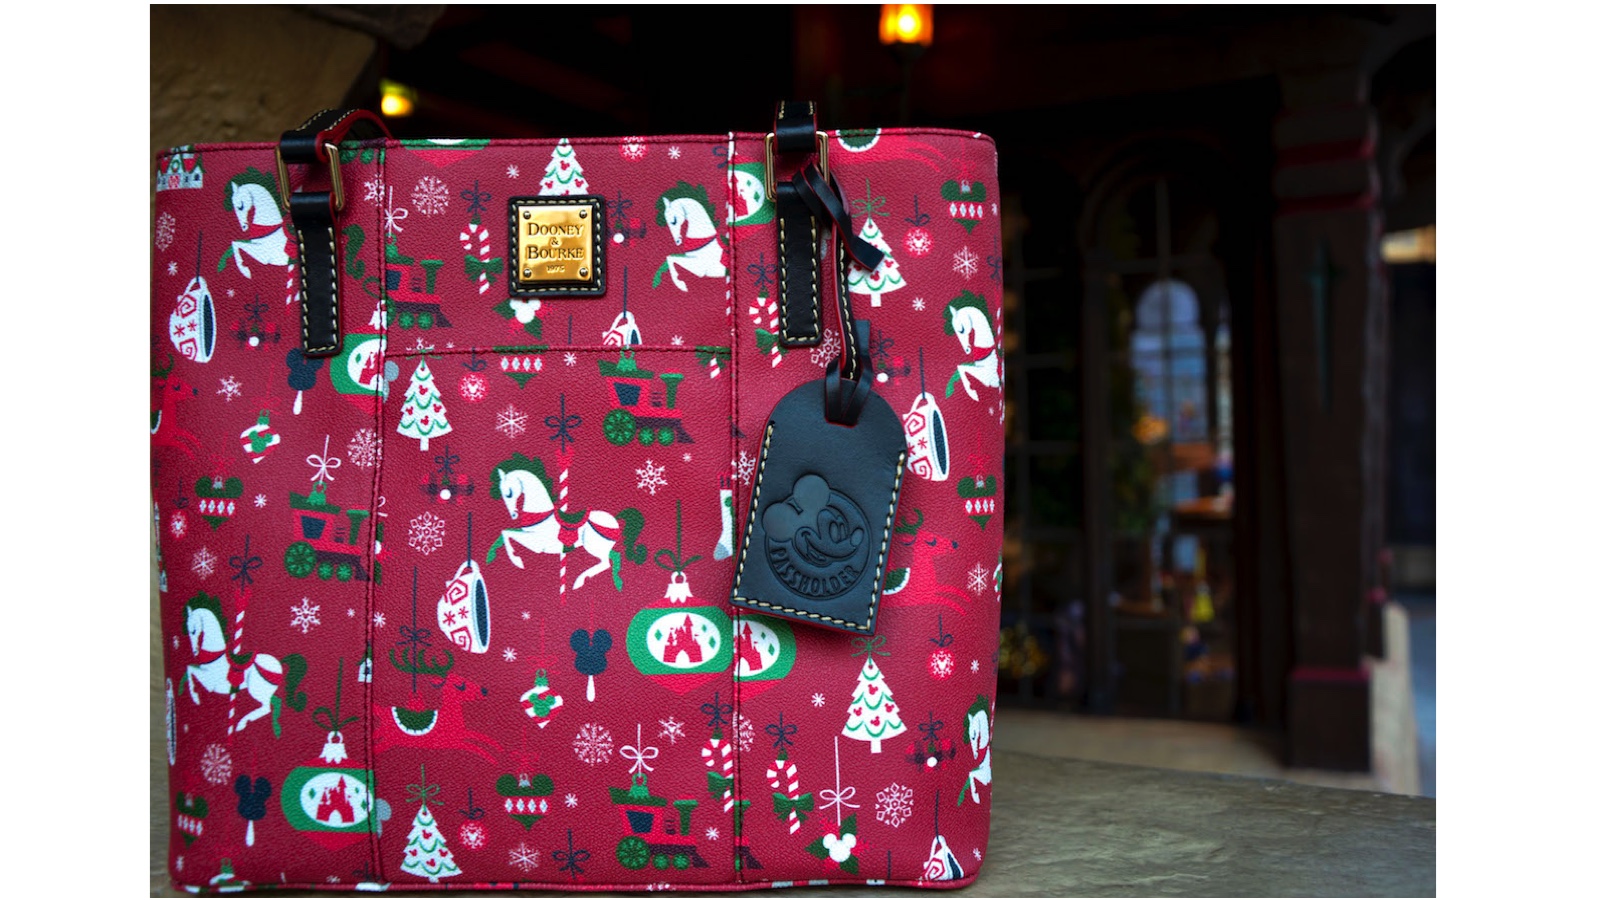 New Disney Holiday Dooney & Bourke Collection Has Yuletide Style